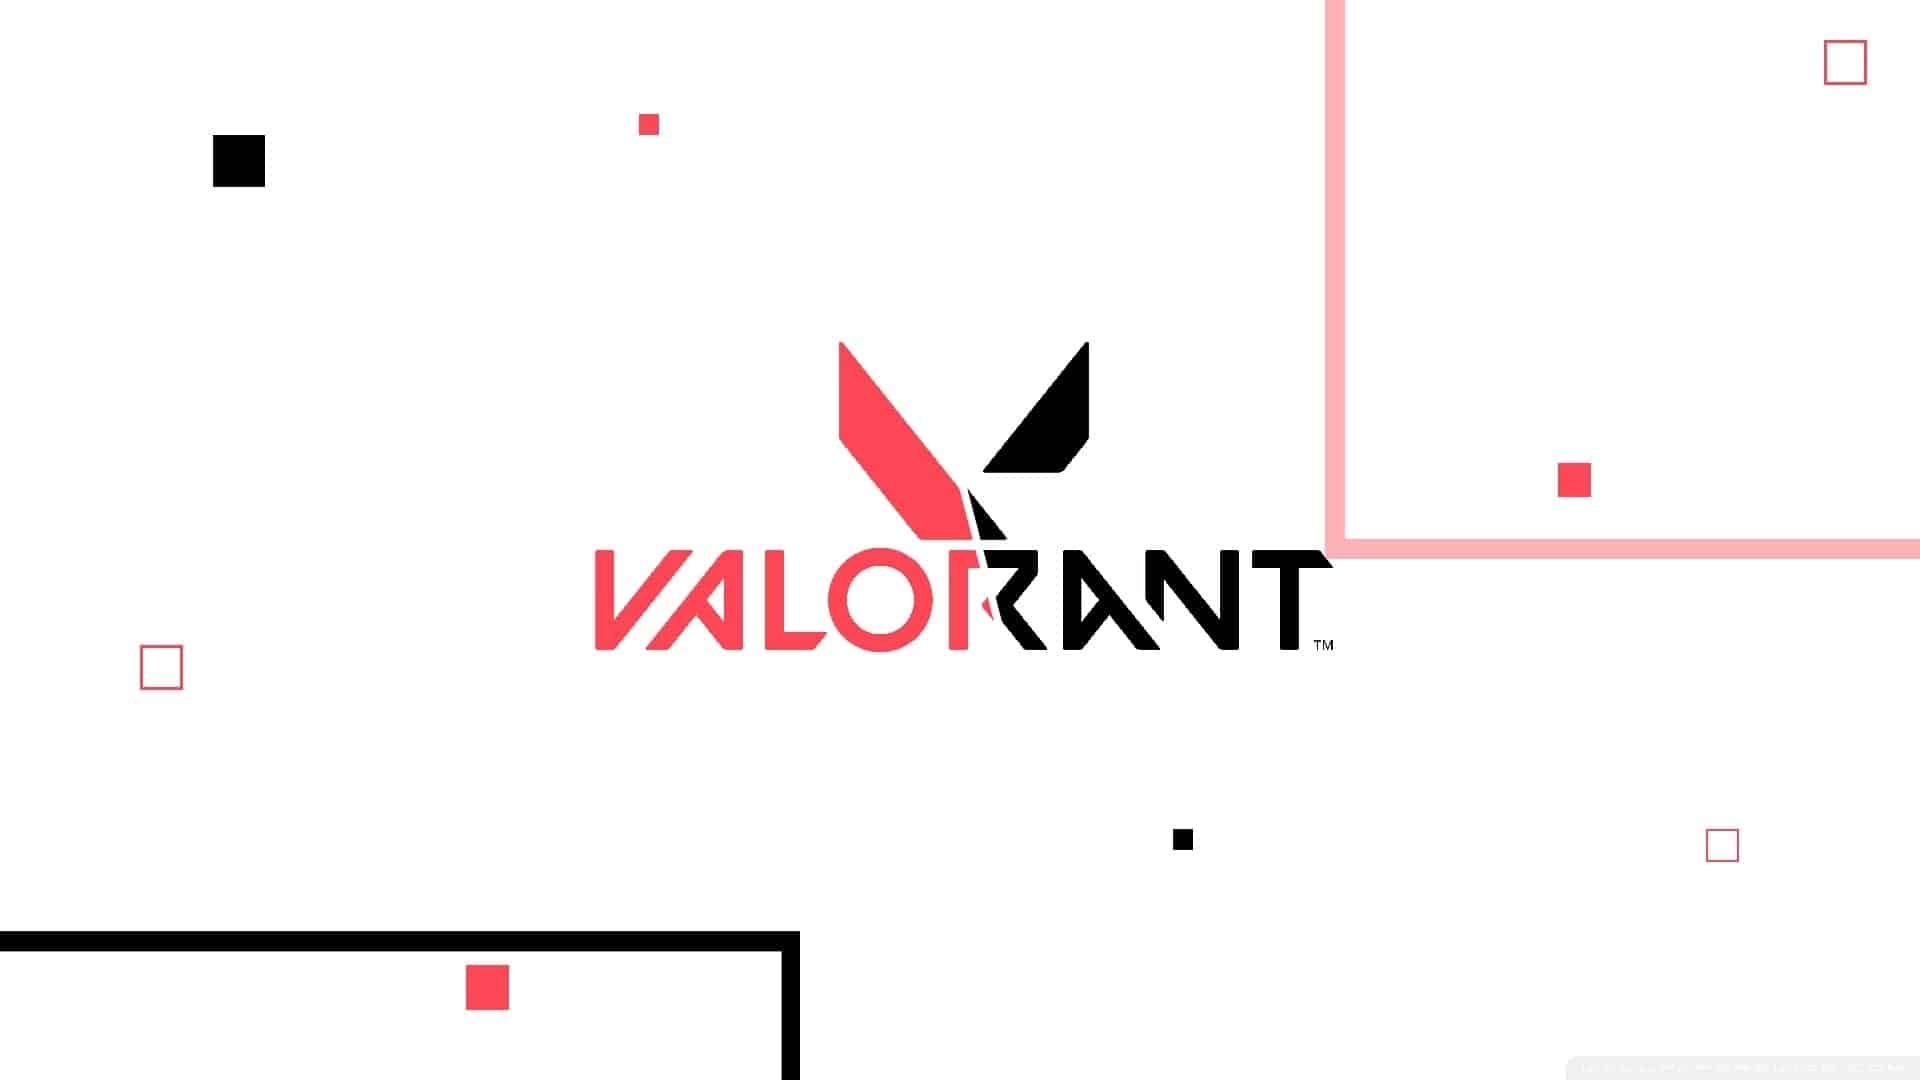 Image by Dren_ban – The Valorant logo in black and red over a white background.